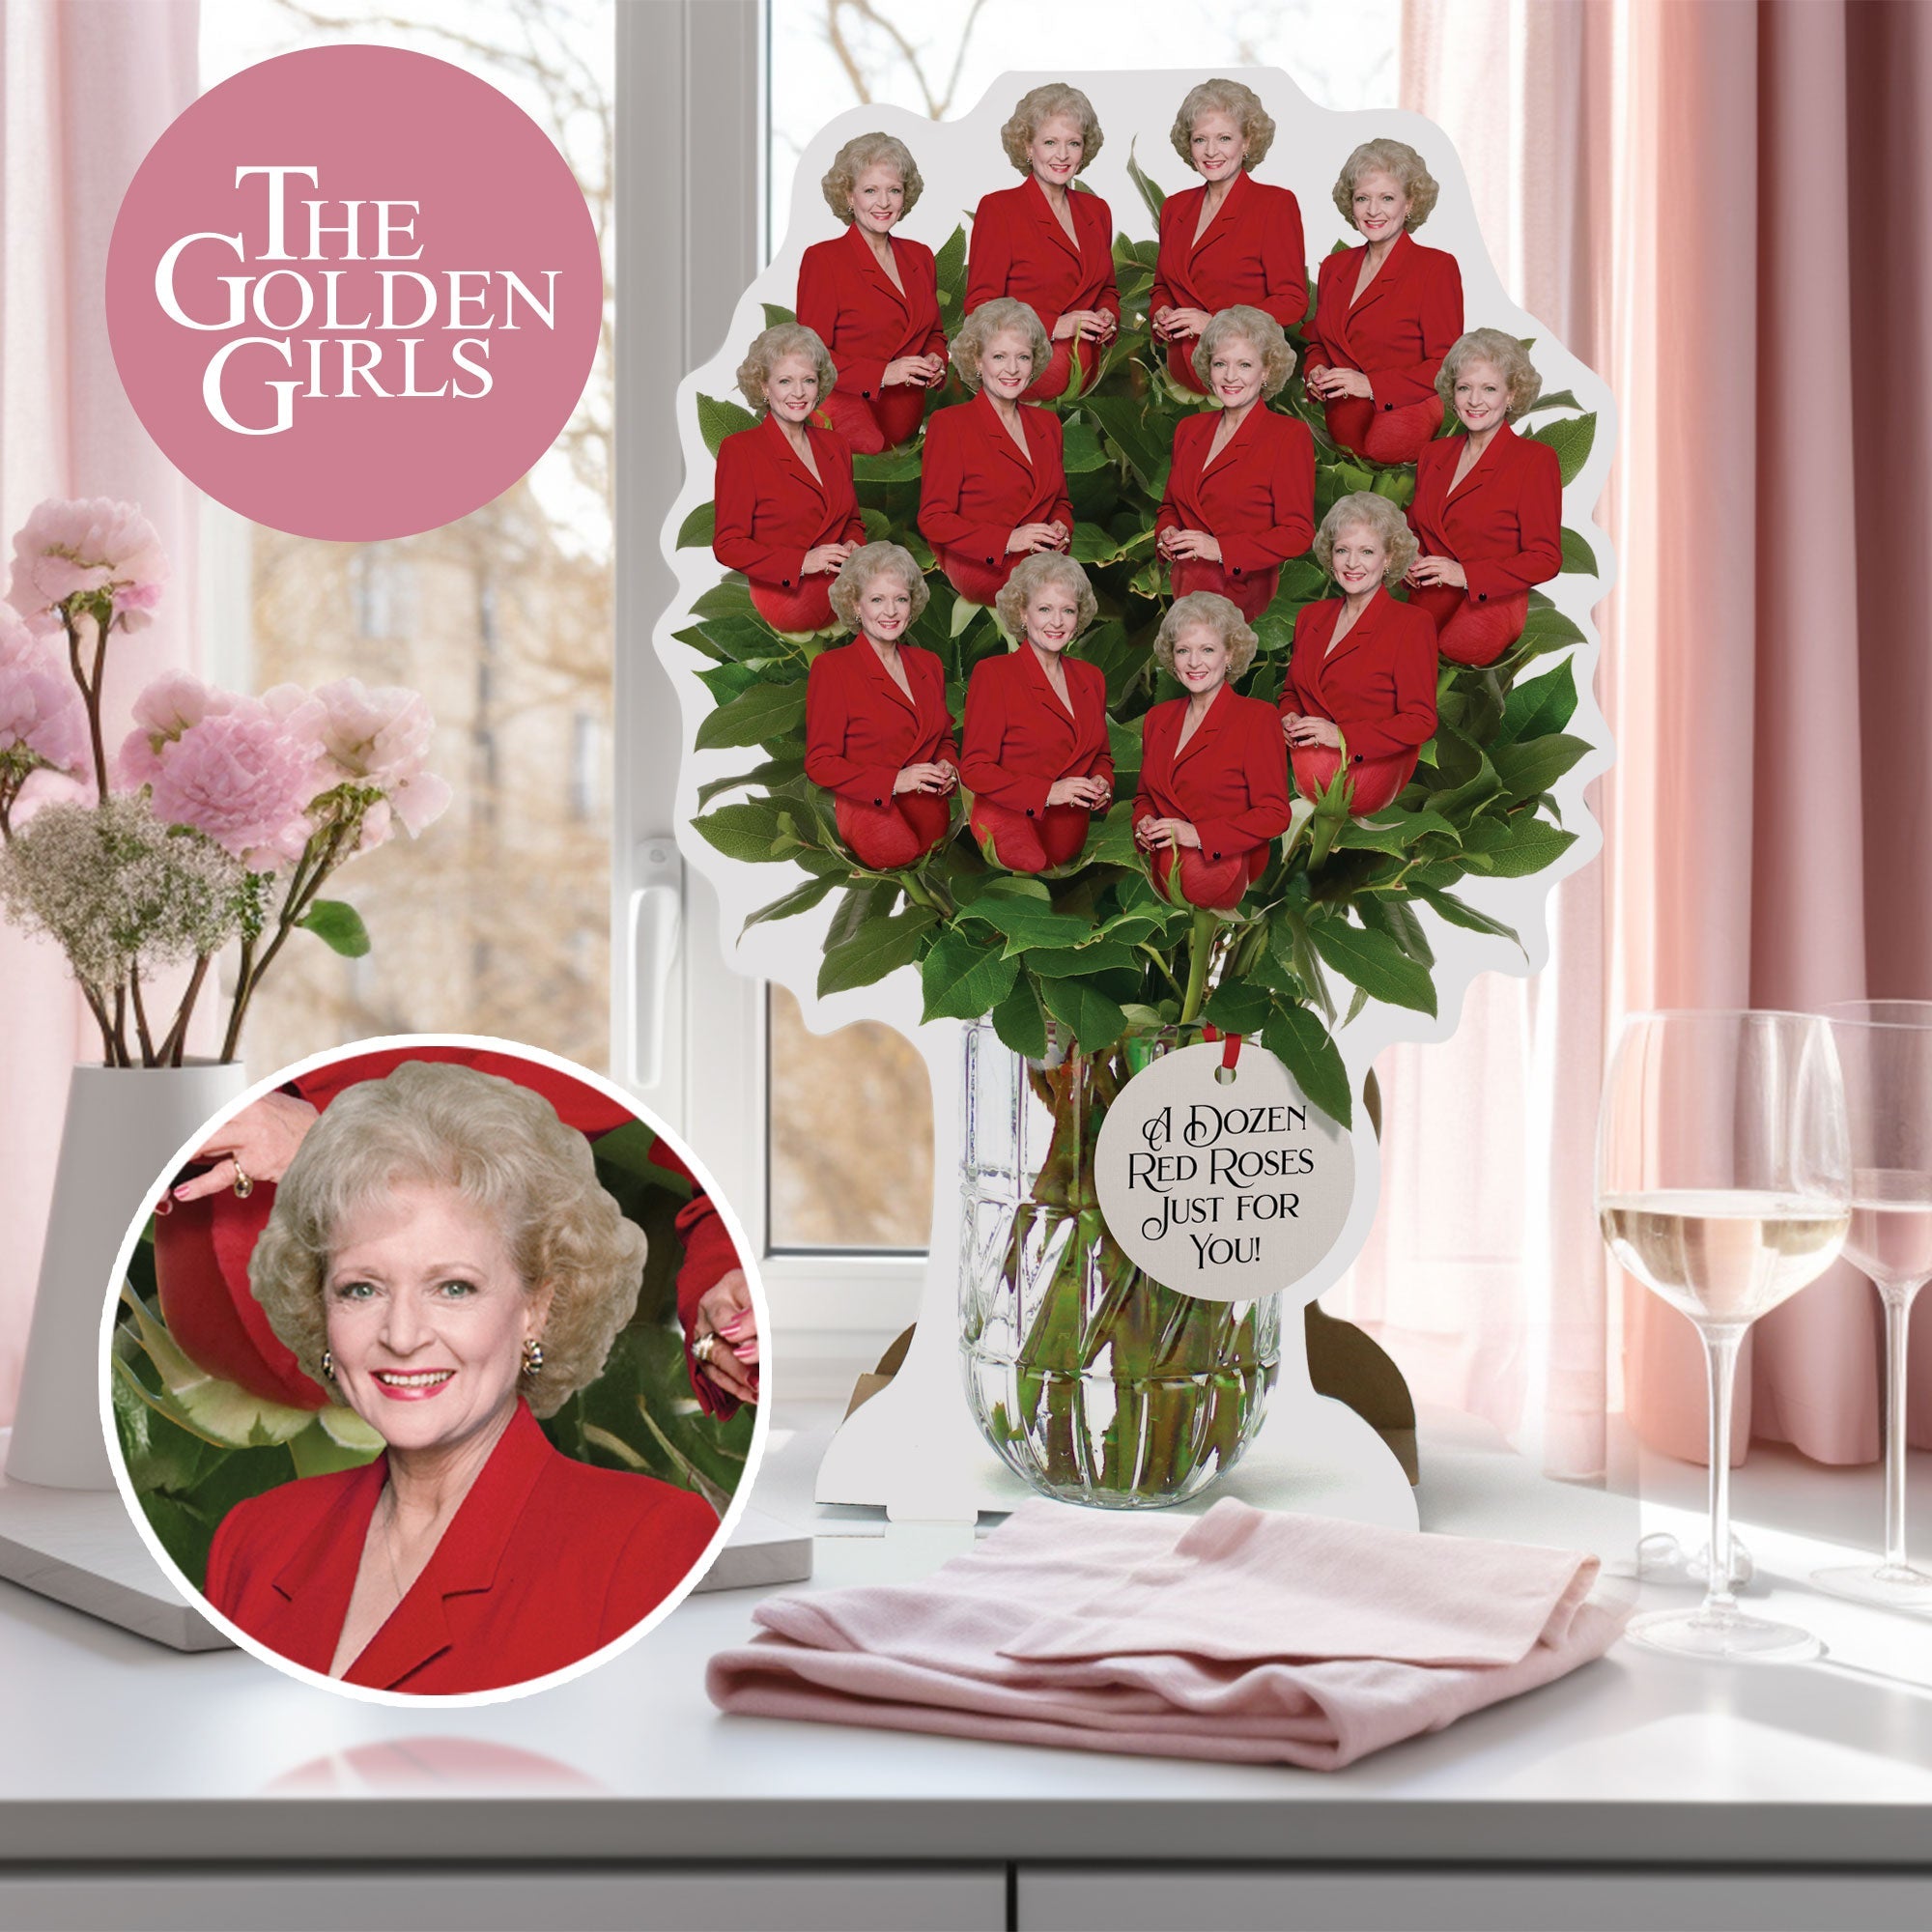 The Golden Girls A Dozen Red Roses Printed Bouquet Features Betty White Anniversary Mother S Day Birthday Valentines Gift Decor For